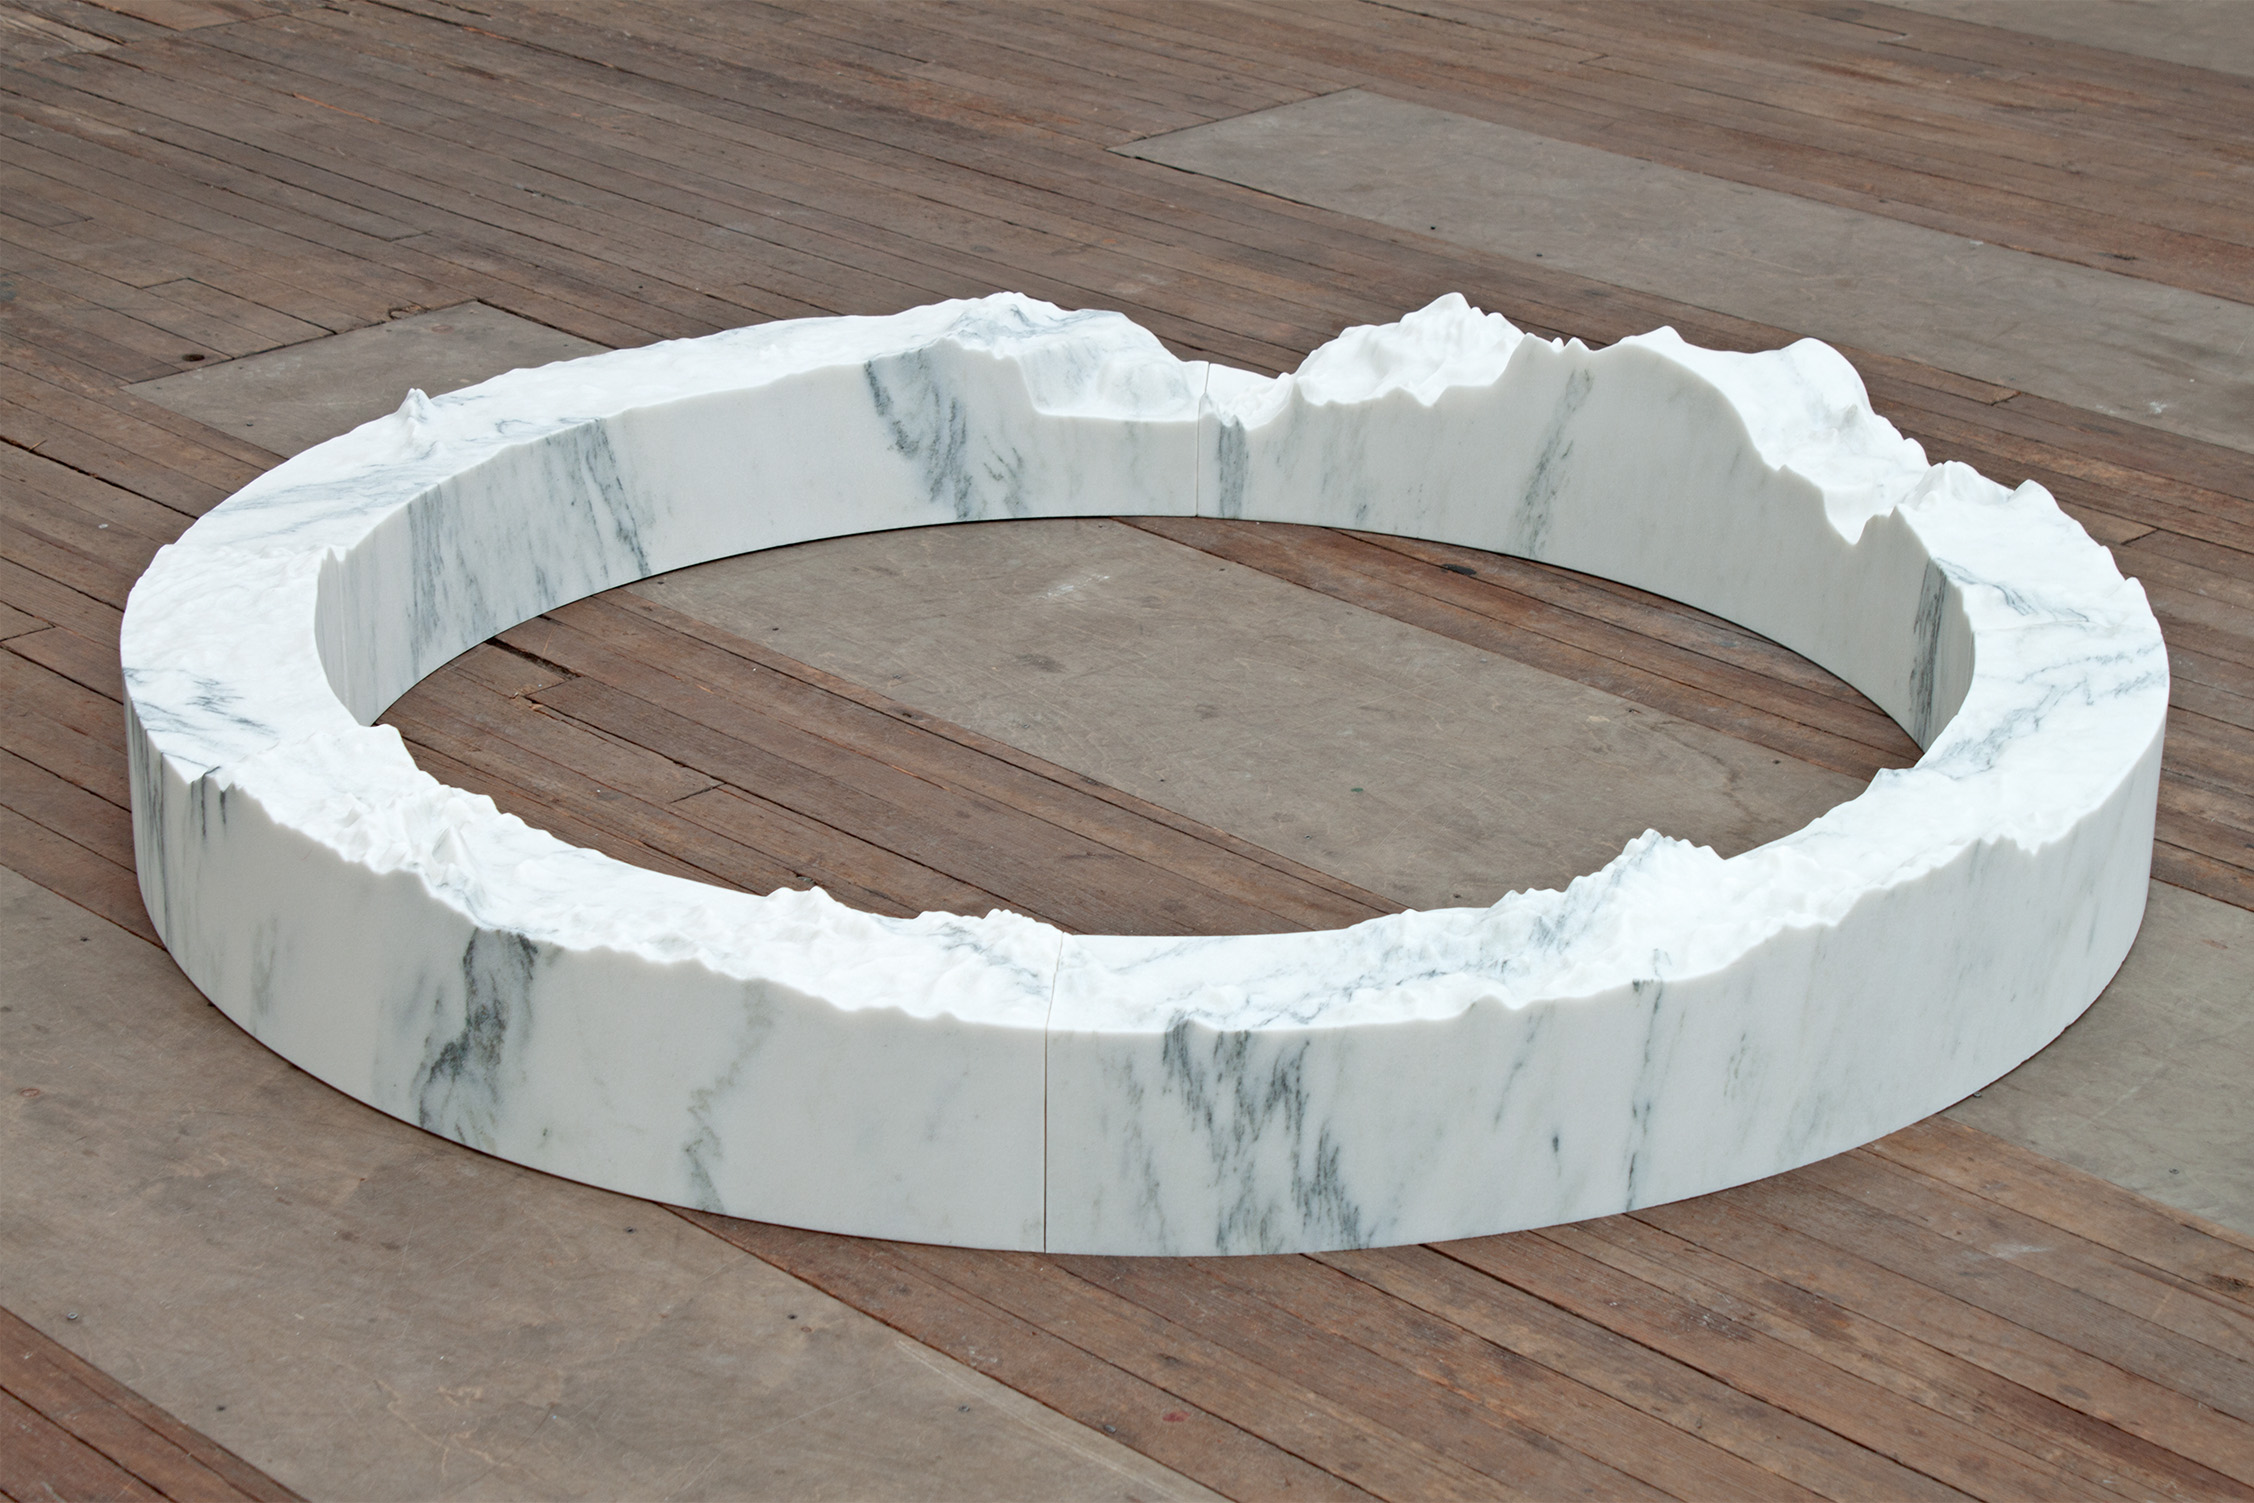 Large marble ring on a wooden floor with erratic top edges